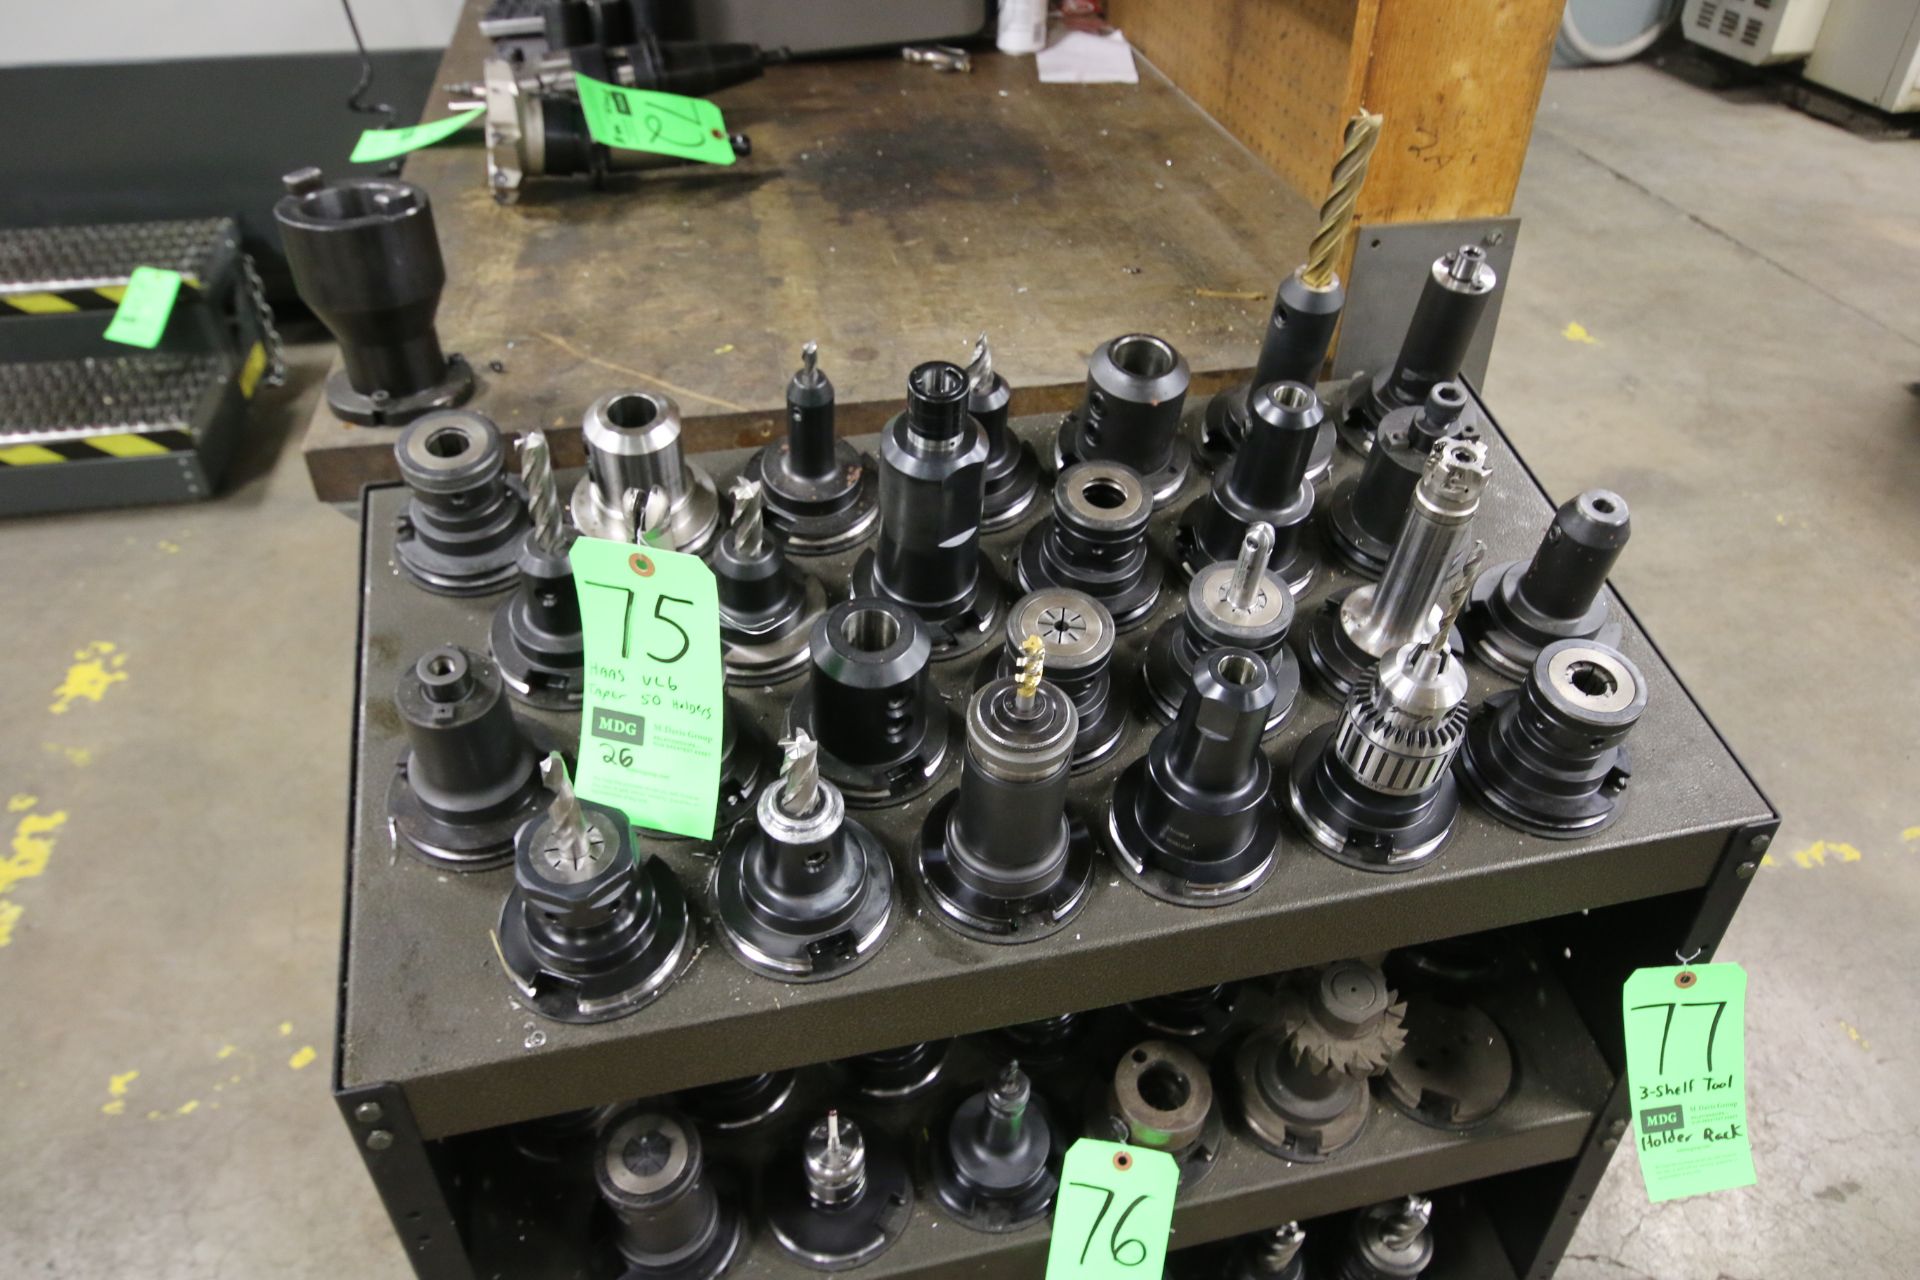 CAT 50 Taper Tool Holders by Parlec an Others - Some with Tooling including: Drill Bits, Reamers,